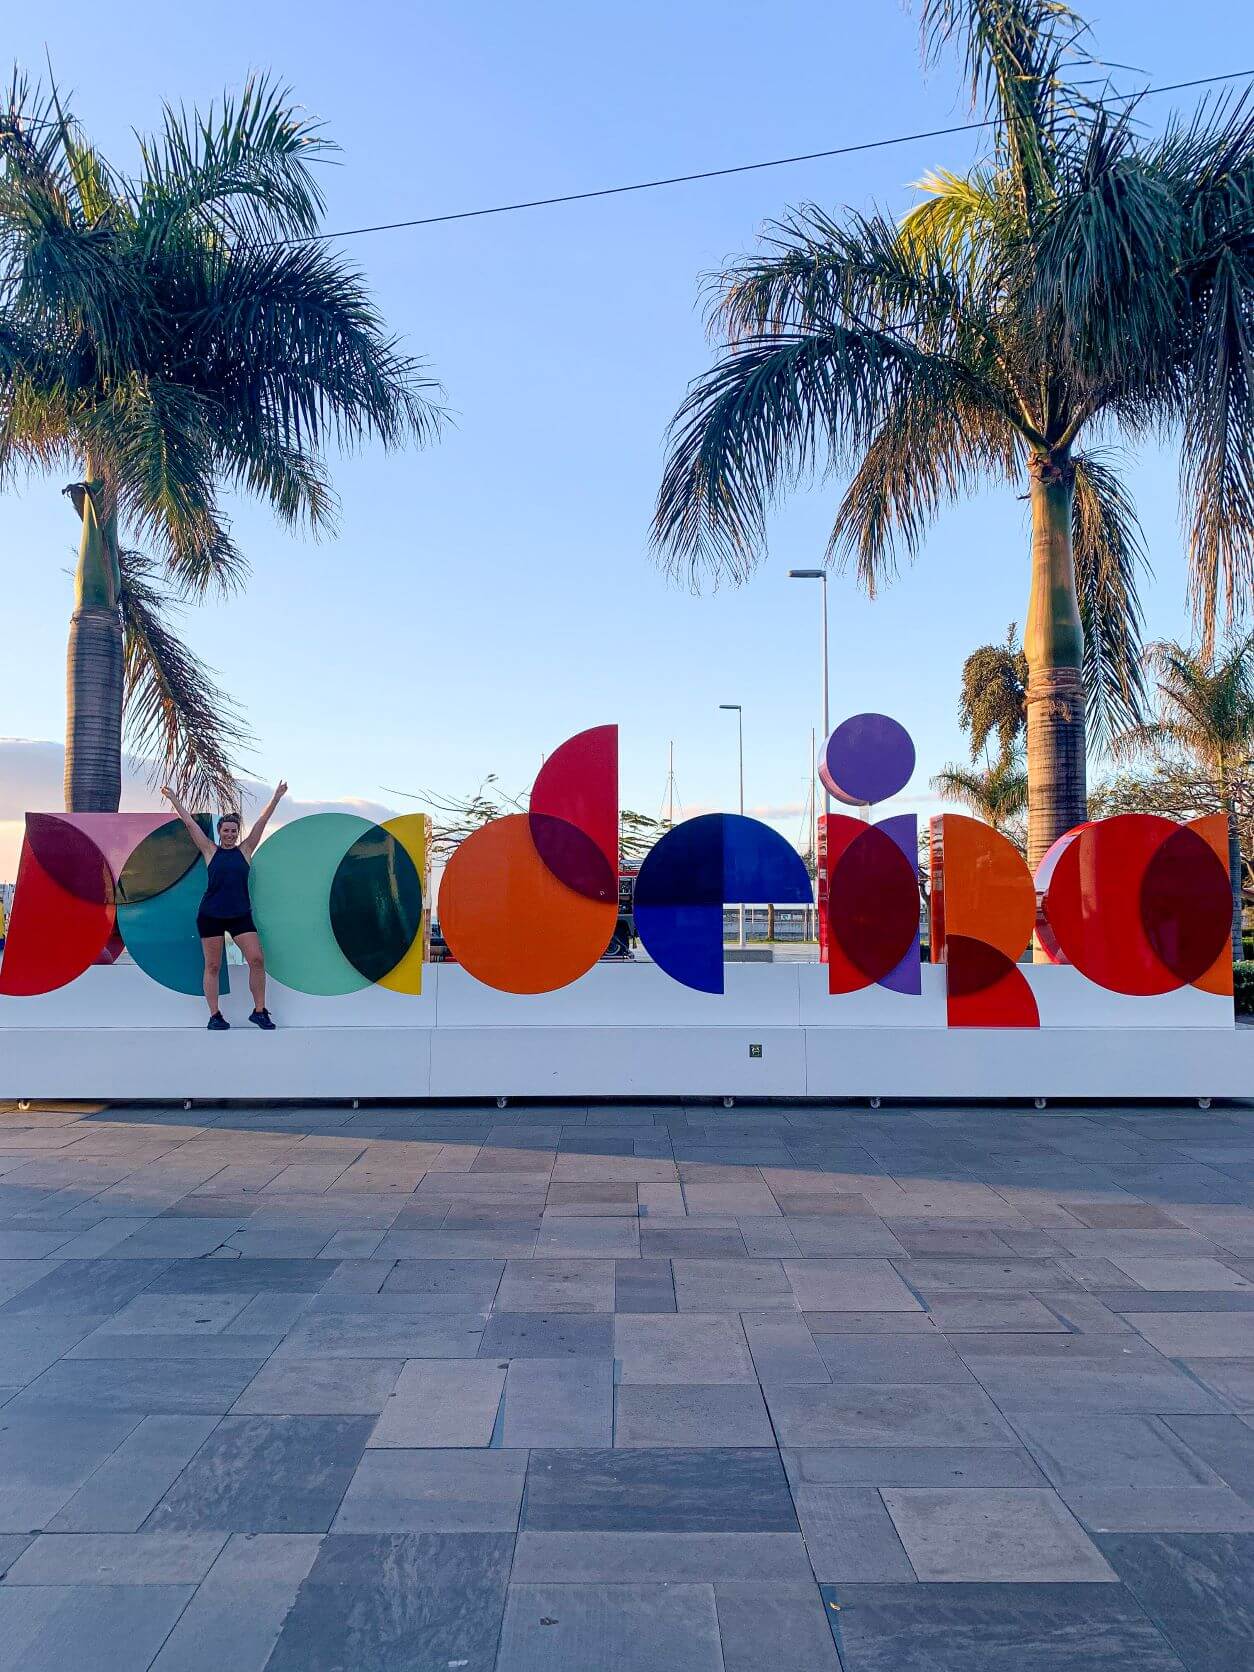 Madeira Travel Guide | colourful sculpture of the word madeira